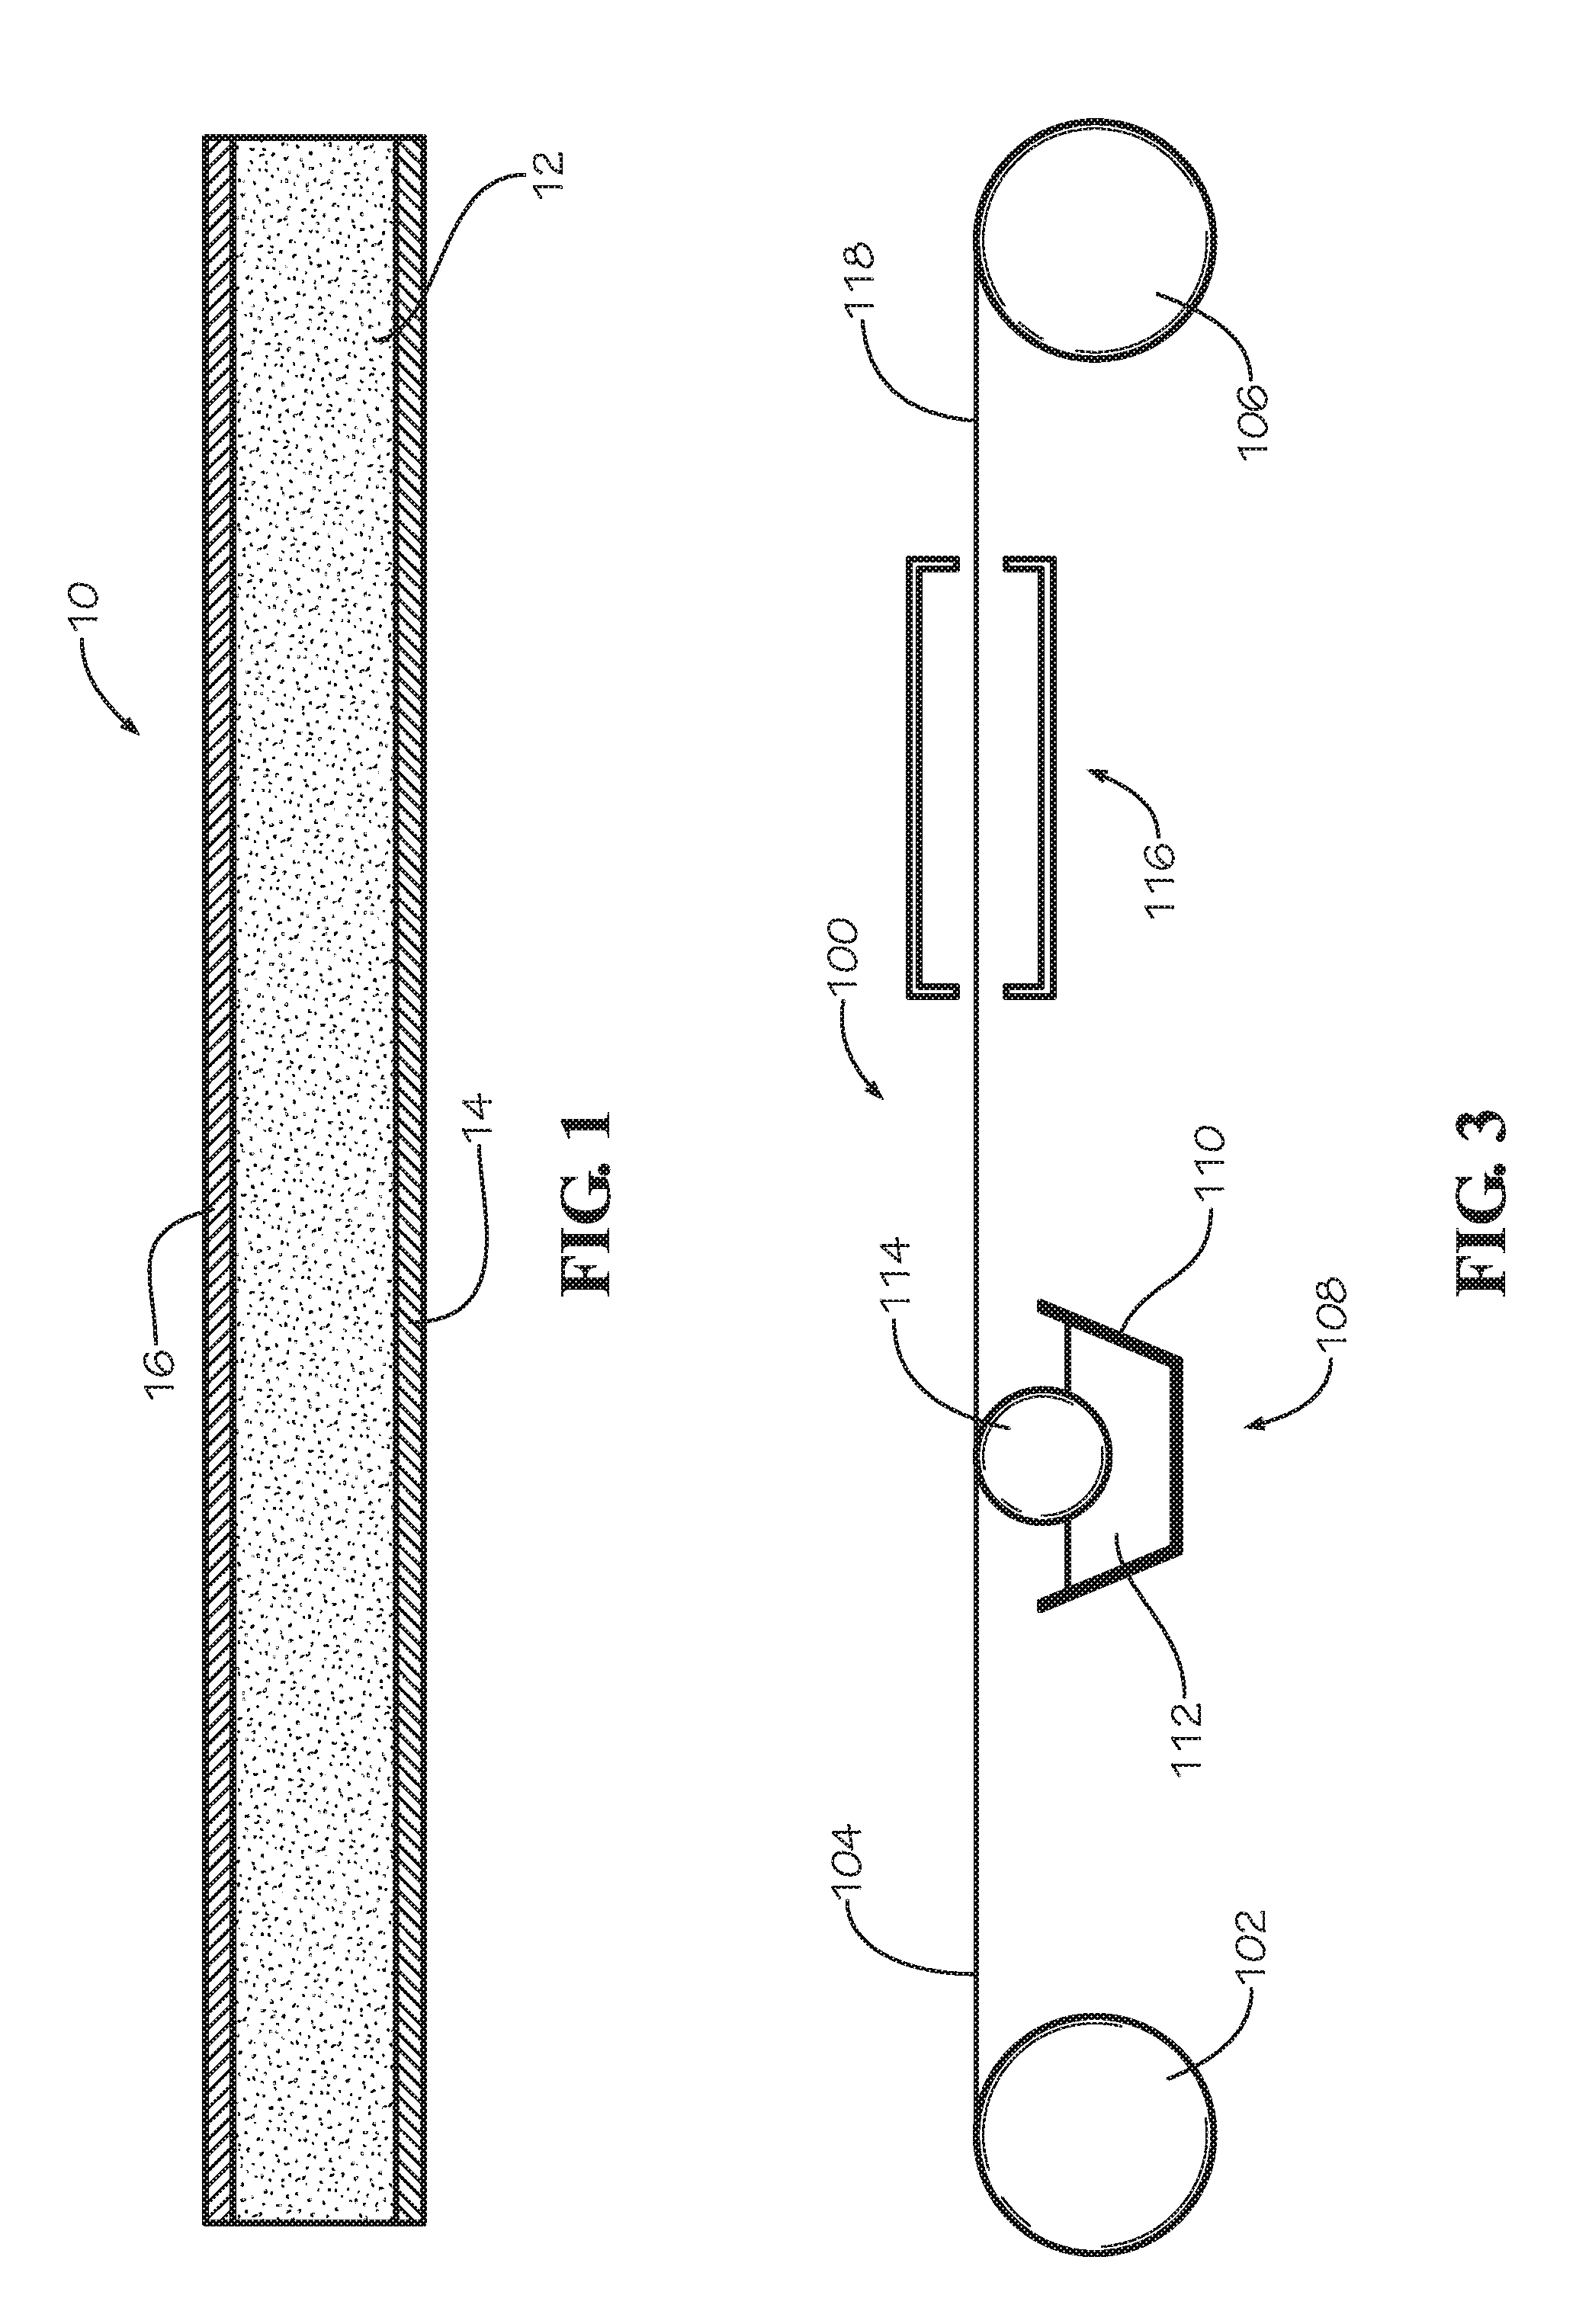 Foam sheathing reinforced with hybrid laminated fabric impregnated with vapor permeable air barrier material and method of making and using same